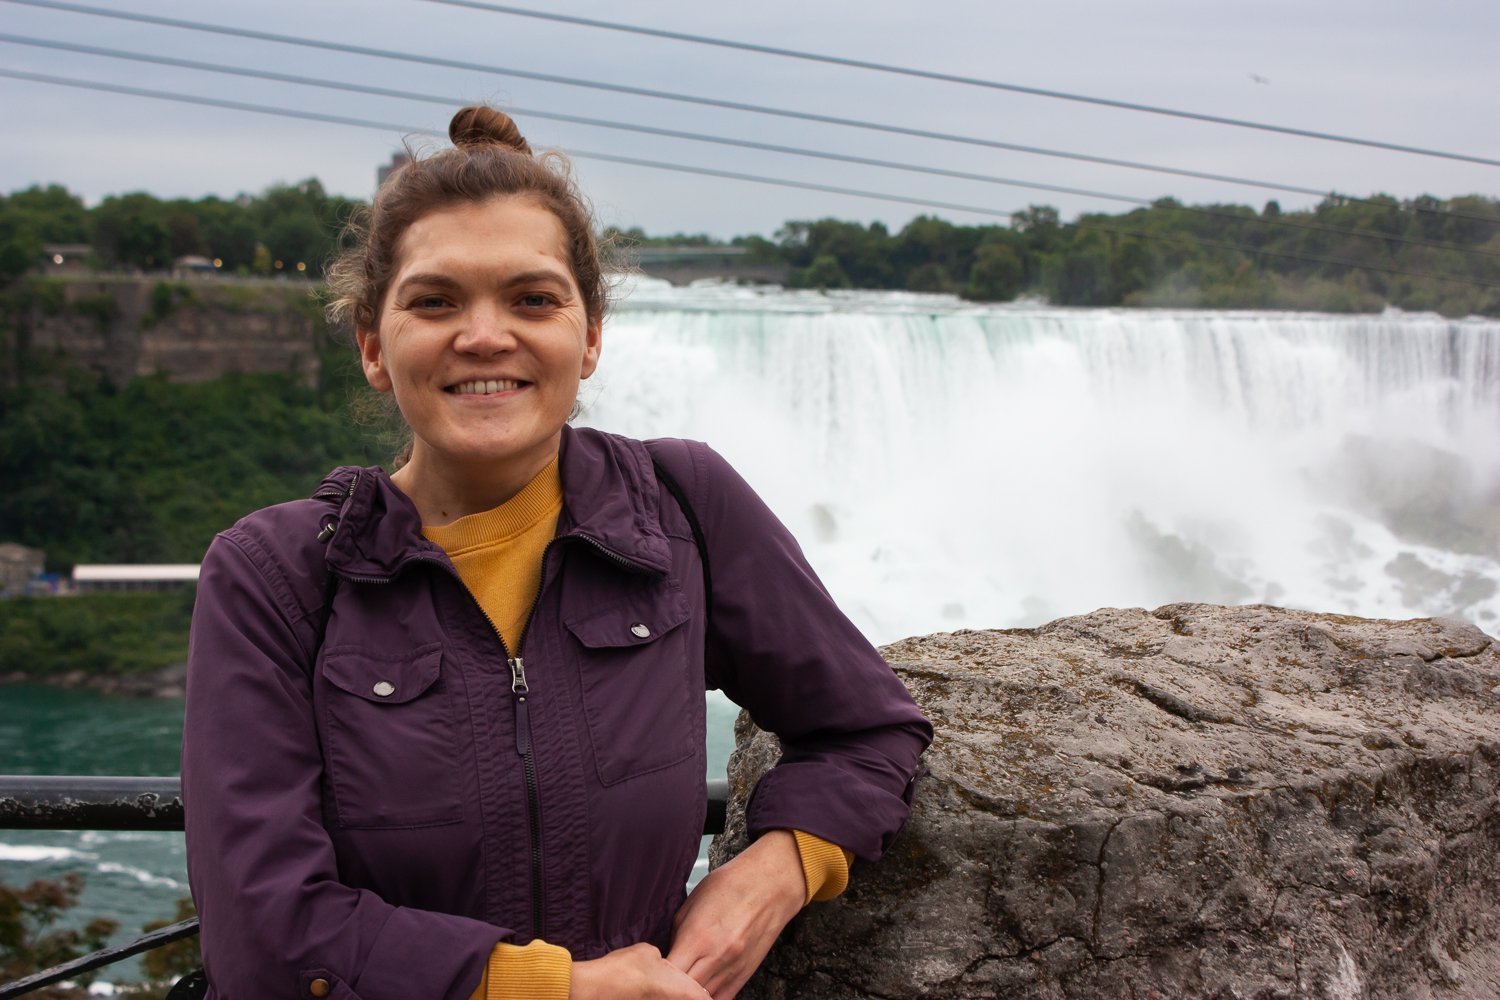 Laura_Suprenant_Photography_Niagara_Falls_Person_with_Disabilities_Travel_Photography_Canada_mother_daughter_adventure-2.jpg